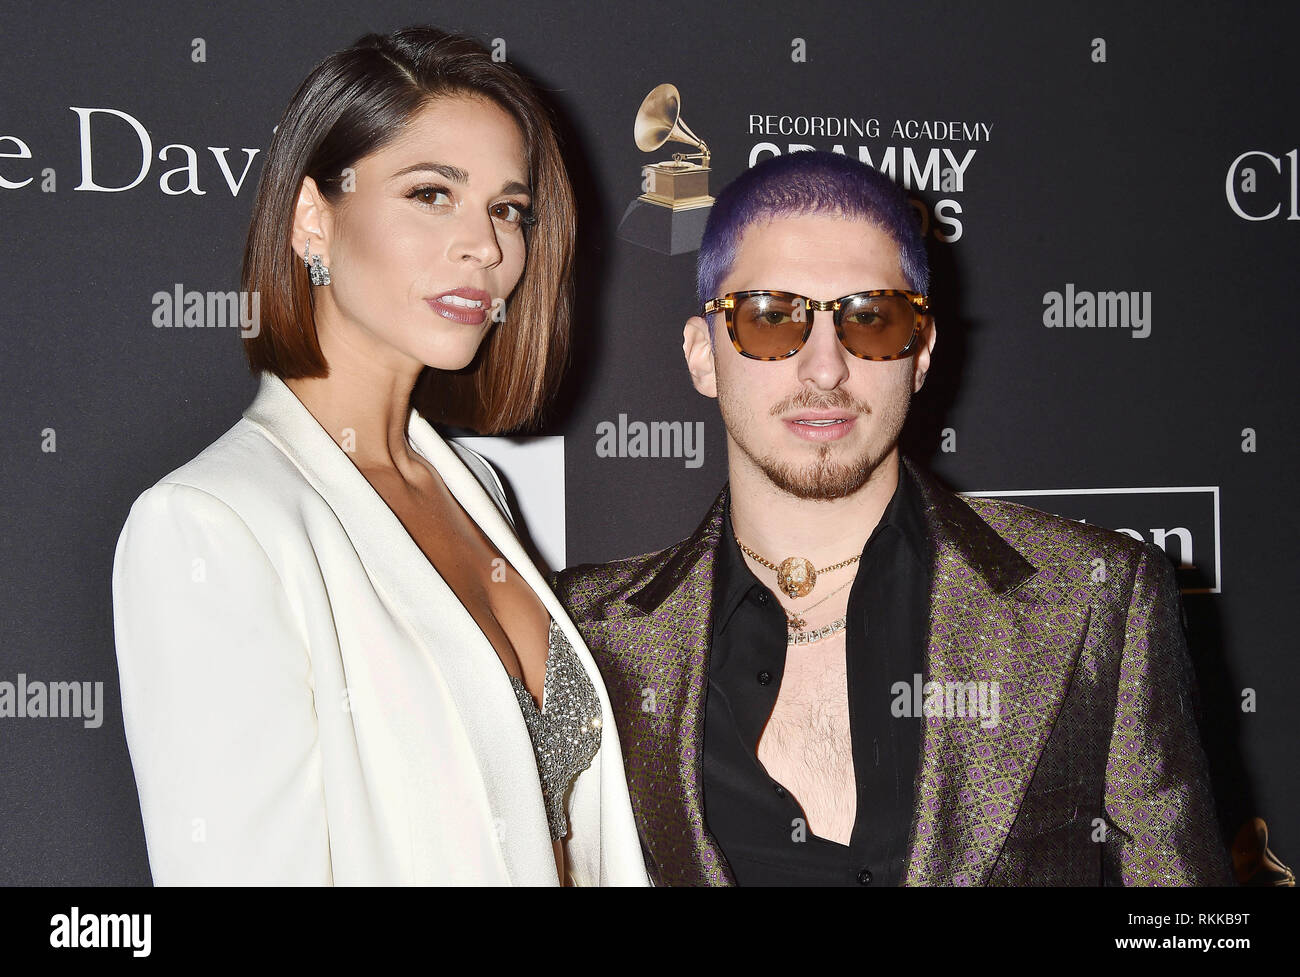 BEVERLY HILLS, CA - FEBRUARY 09: Ali Tamposi (L) and Andrew Watt attend The Recording Academy And Clive Davis' 2019 Pre-GRAMMY Gala at The Beverly Hil Stock Photo